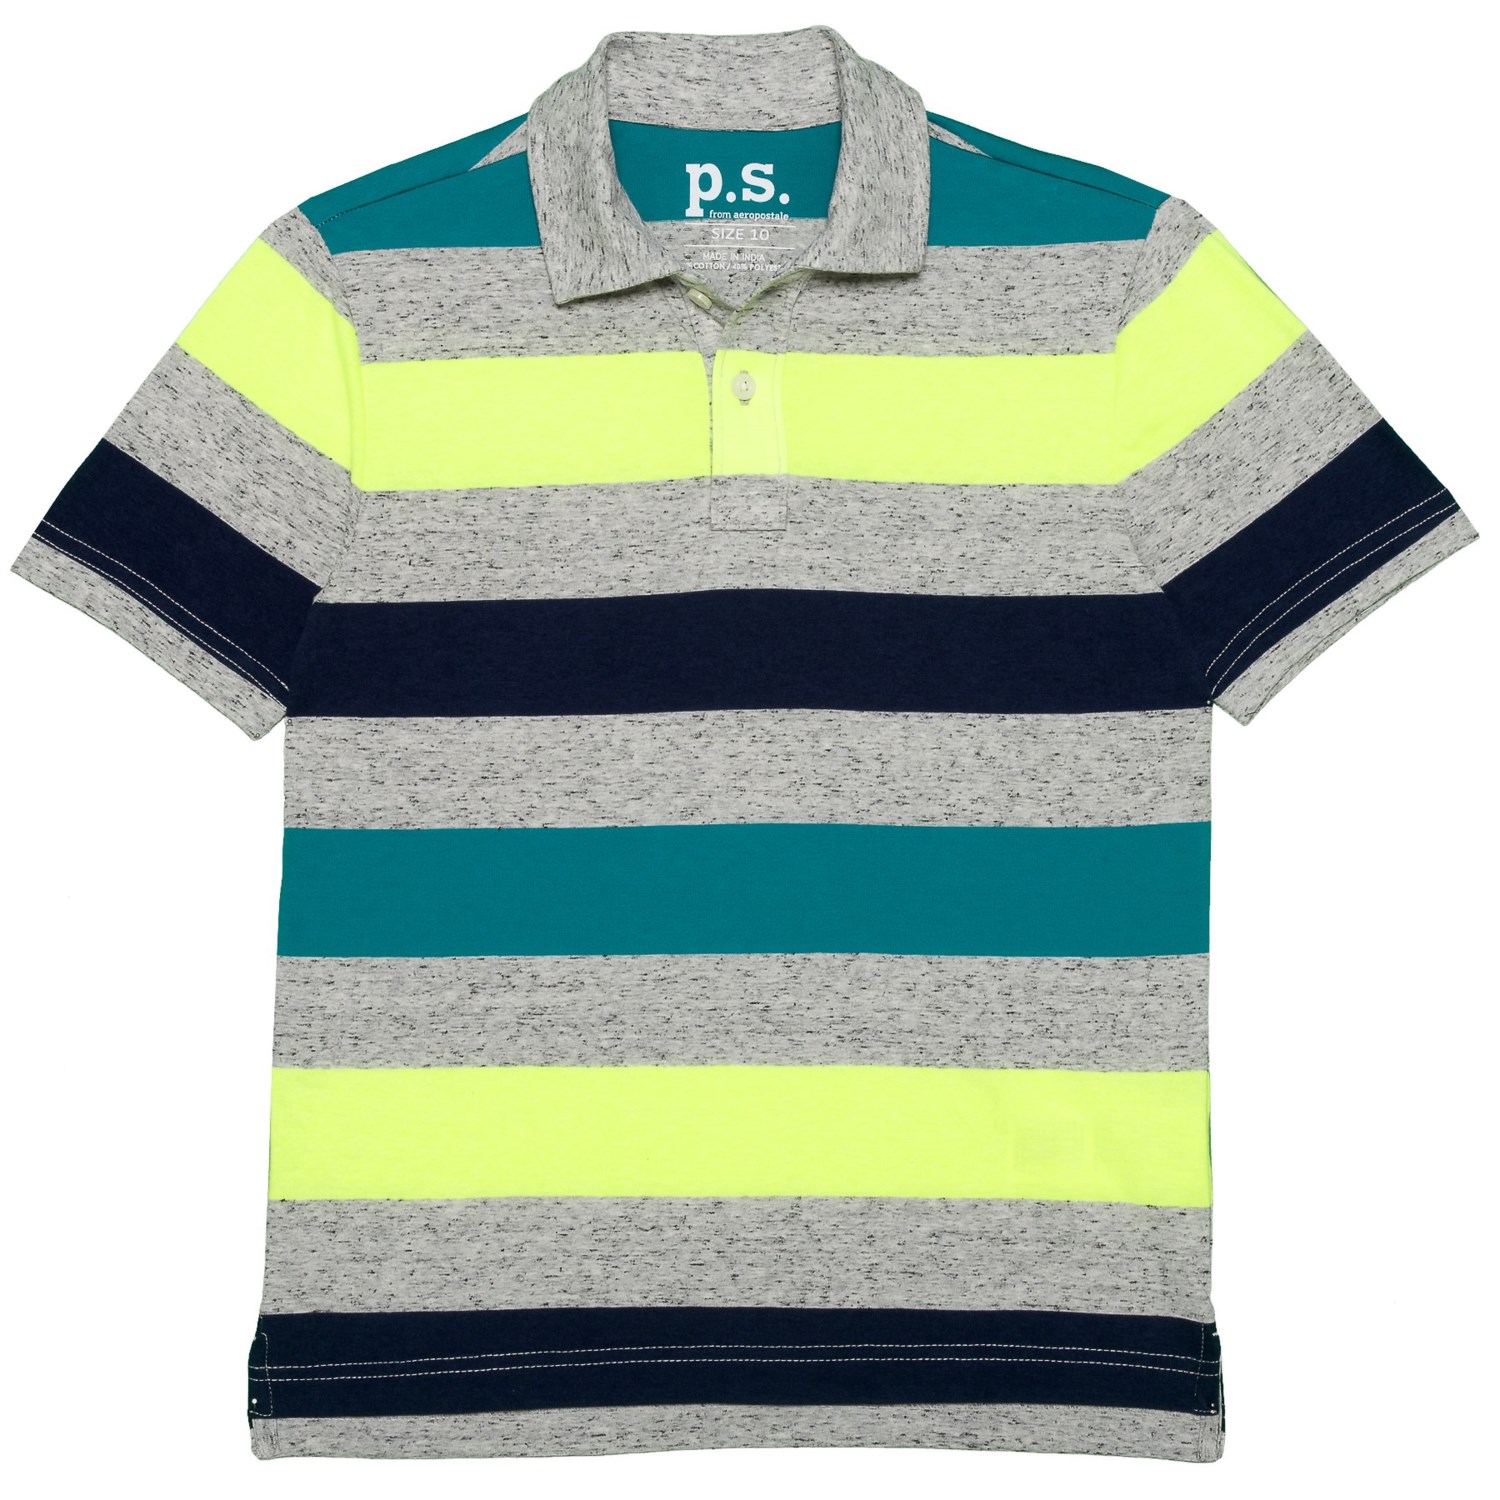 P.S. from Aeropostale Striped Polo Shirt – Short Sleeve (For Big Boys)